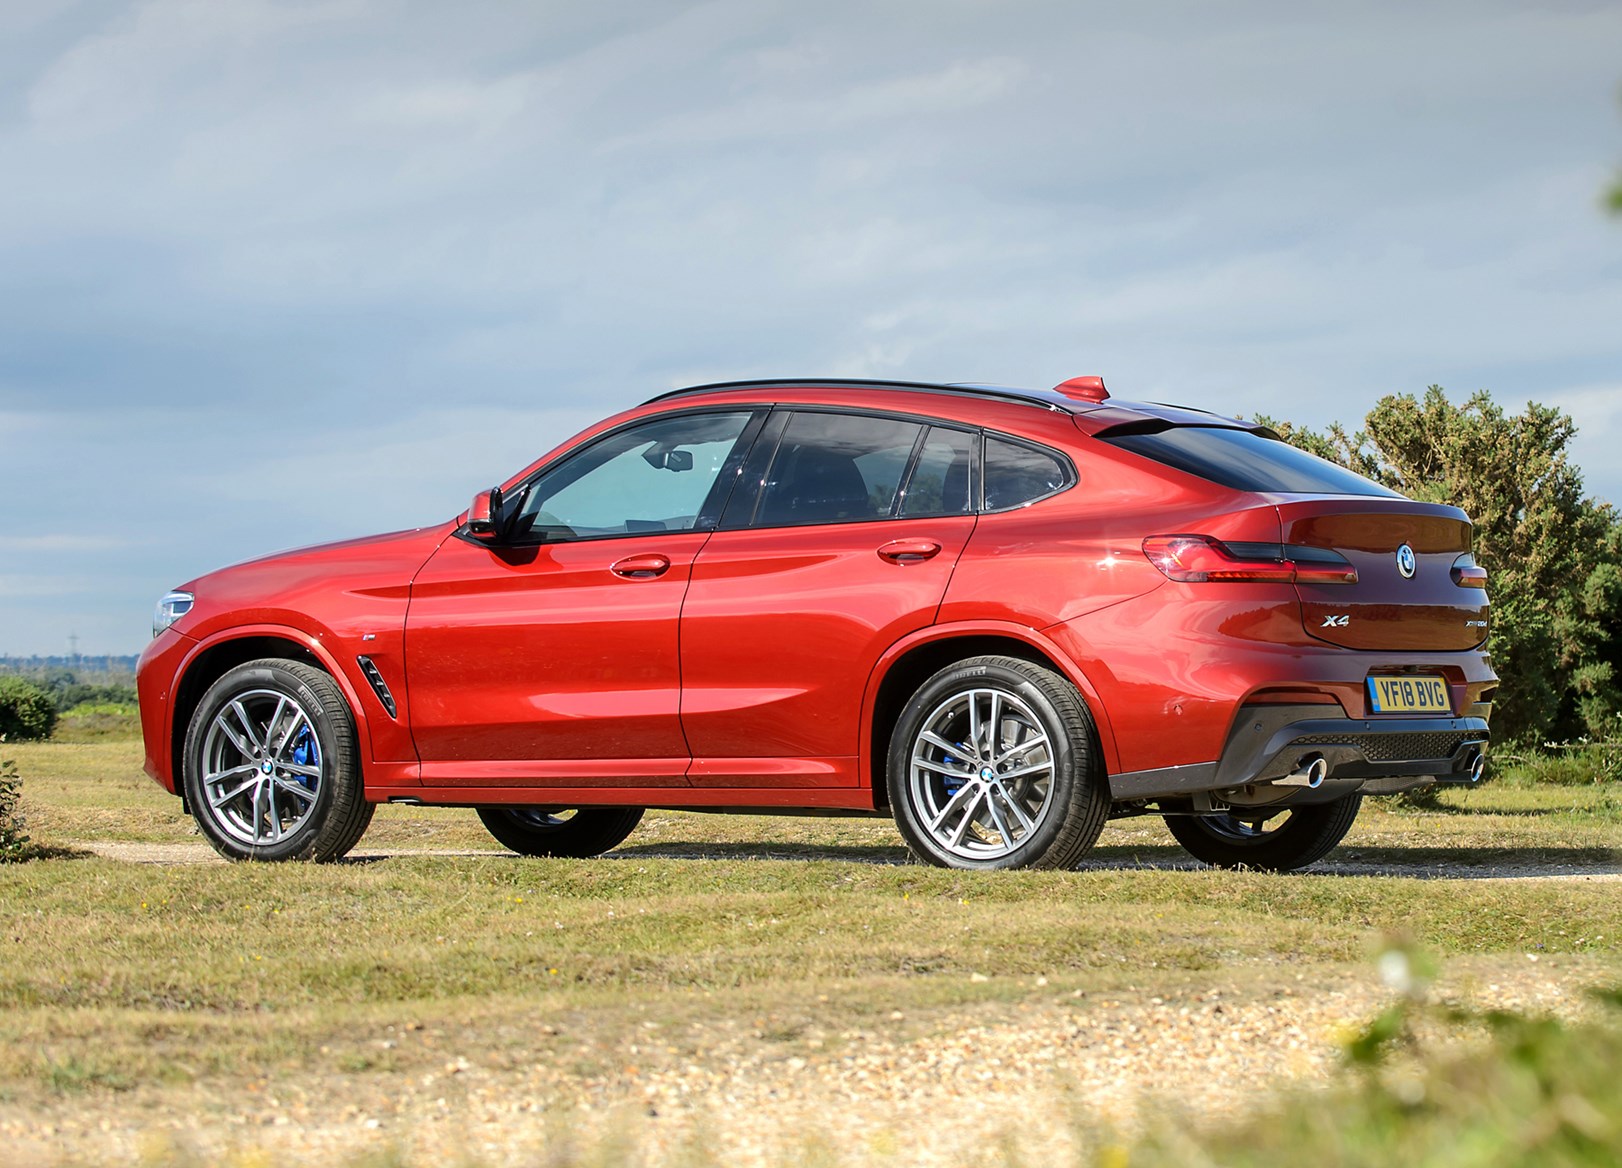 BMW X4 (2020) MPG, Running Costs, Economy & CO2 | Parkers